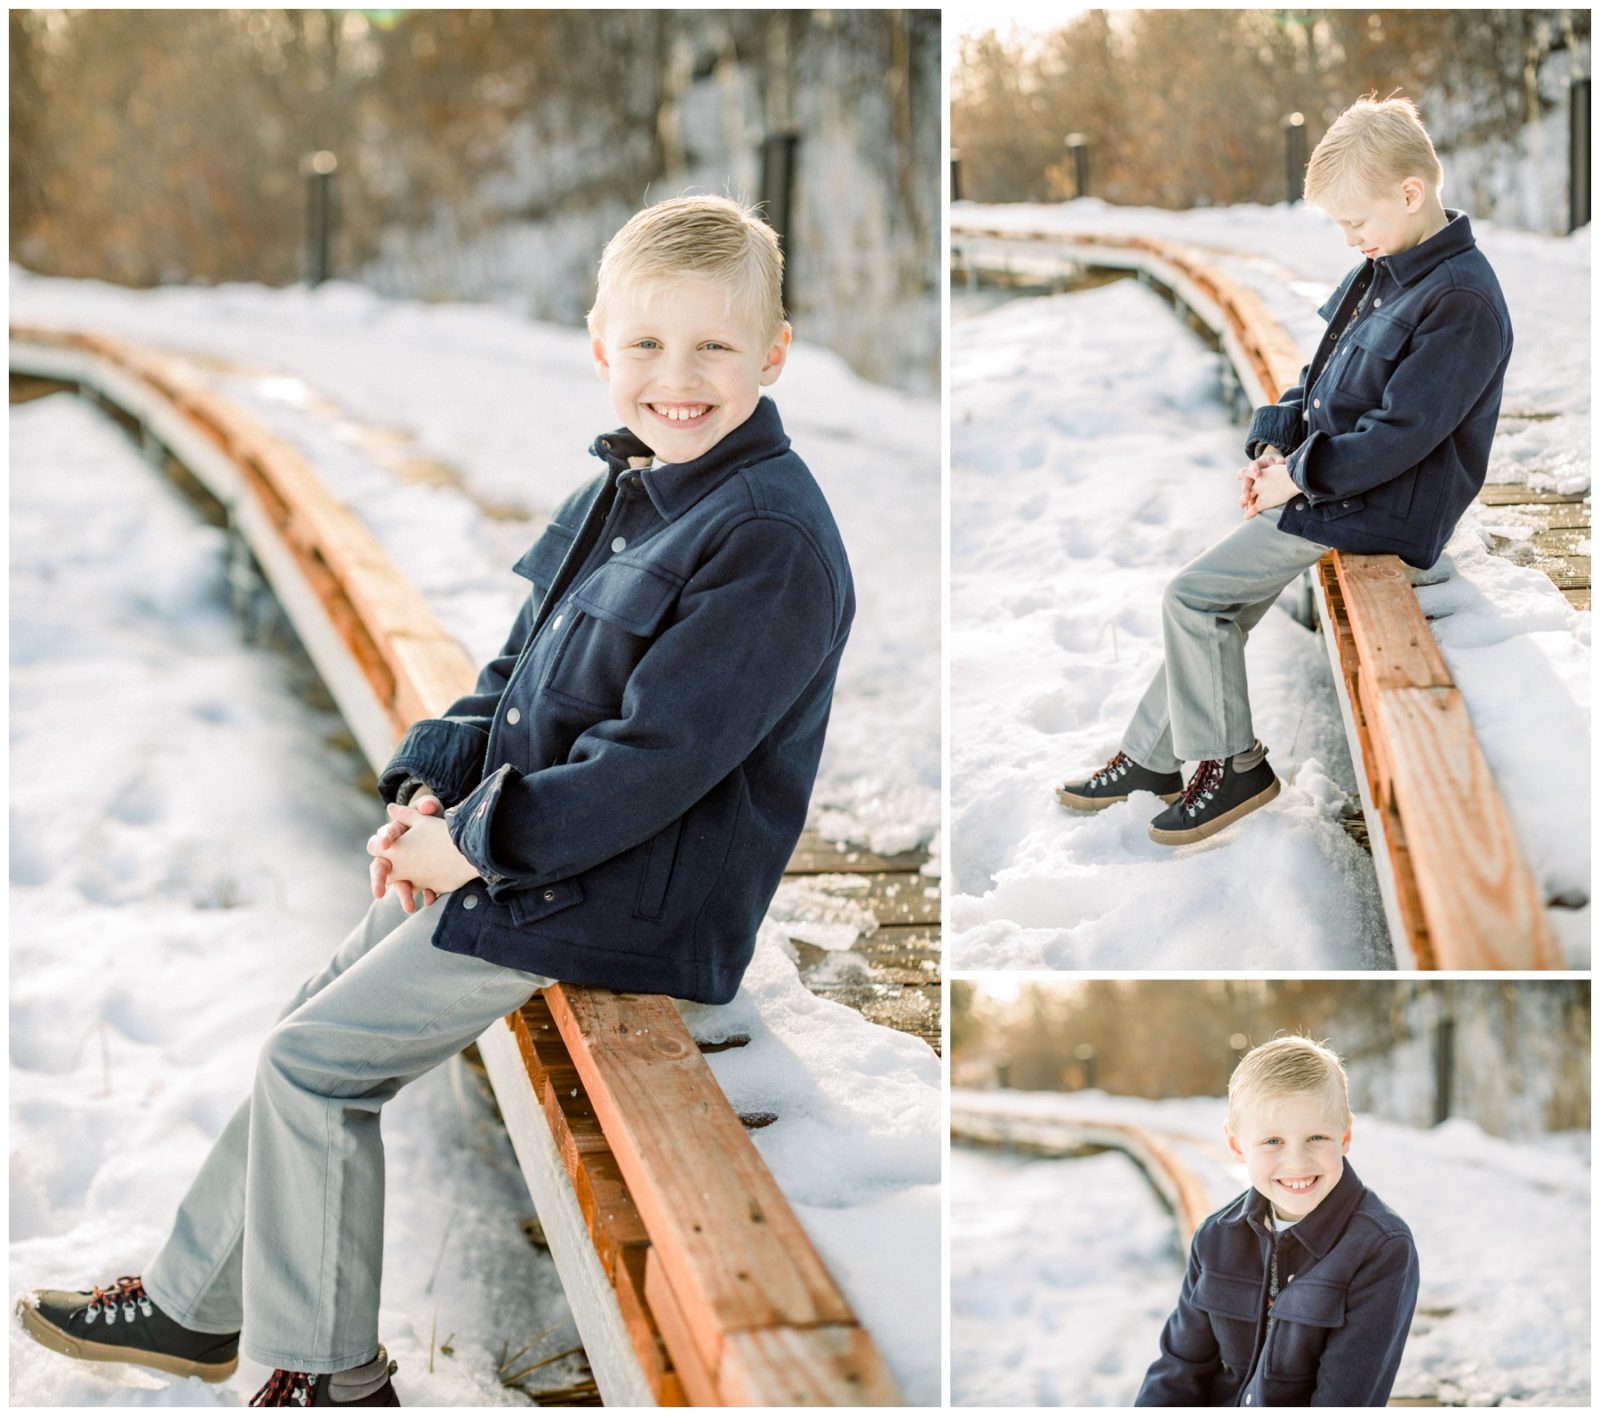 Pictures of a boy smiling in the snow.